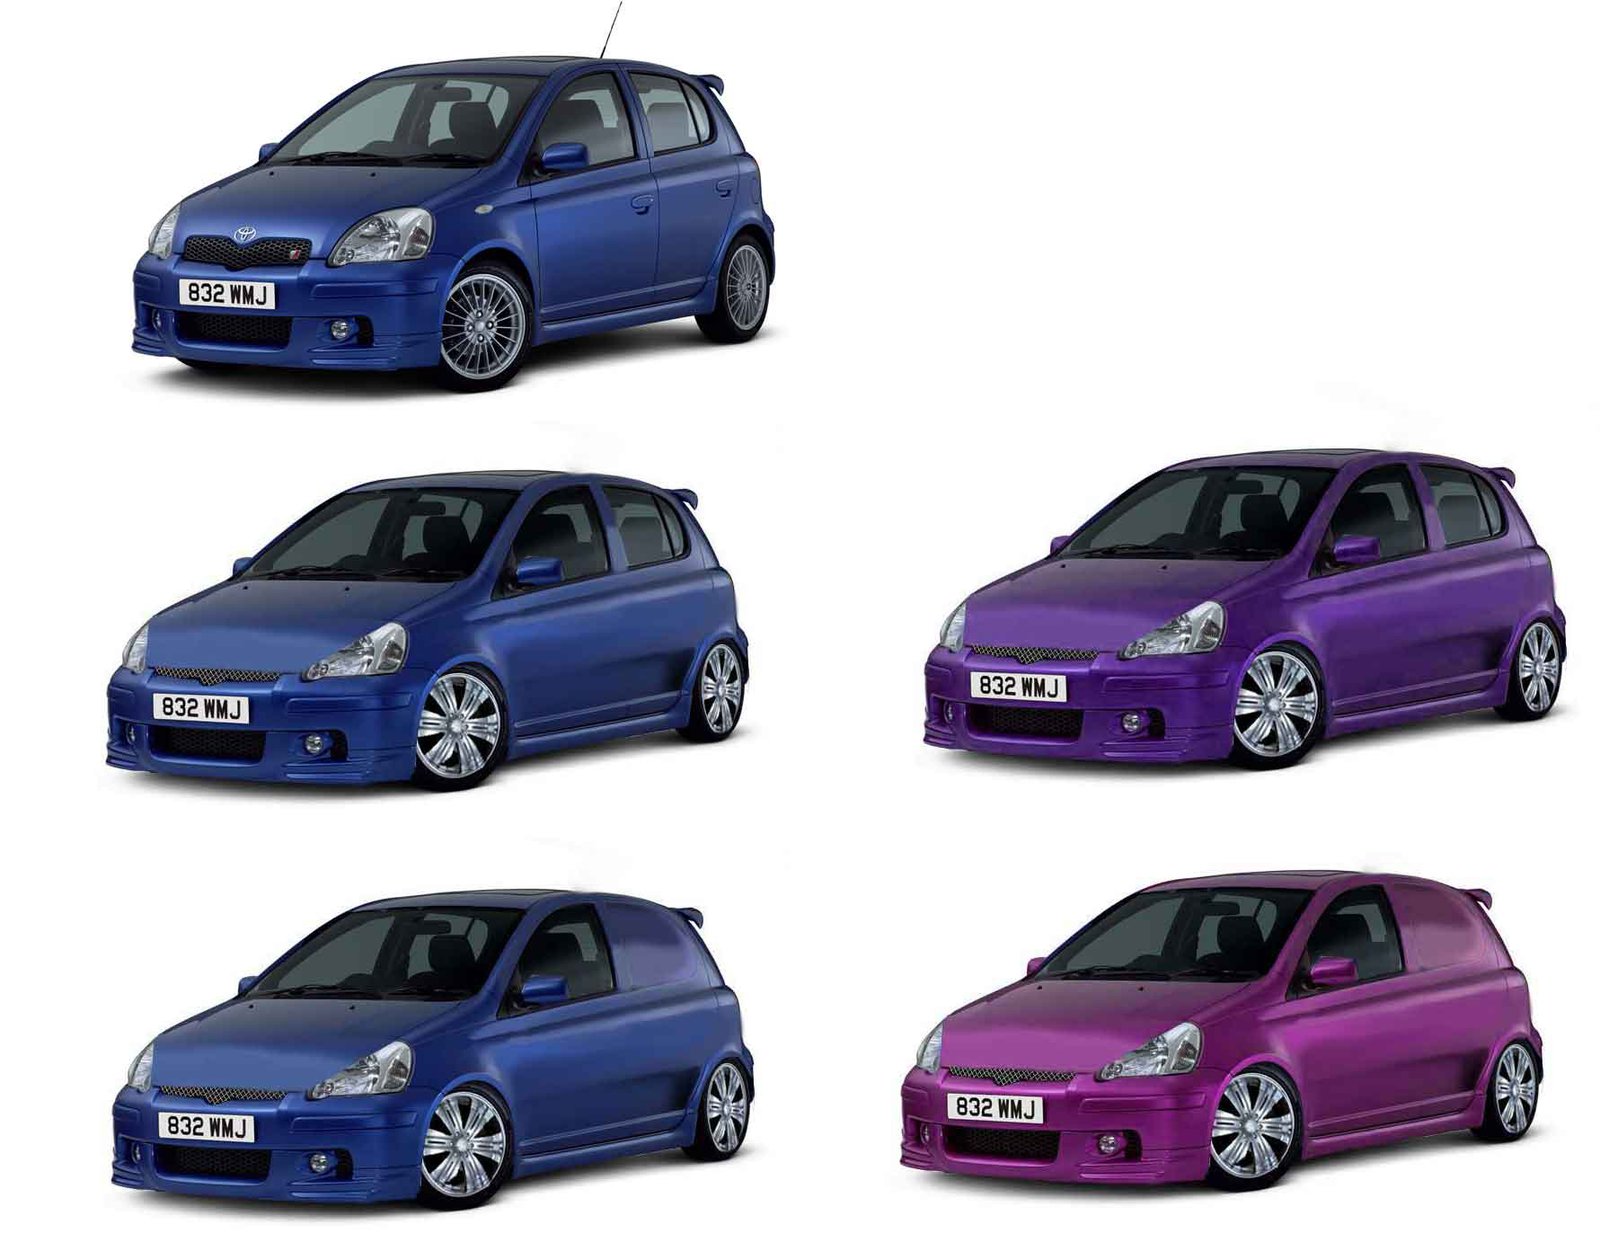 toyota yaris photoshopped by me. van and car conversions